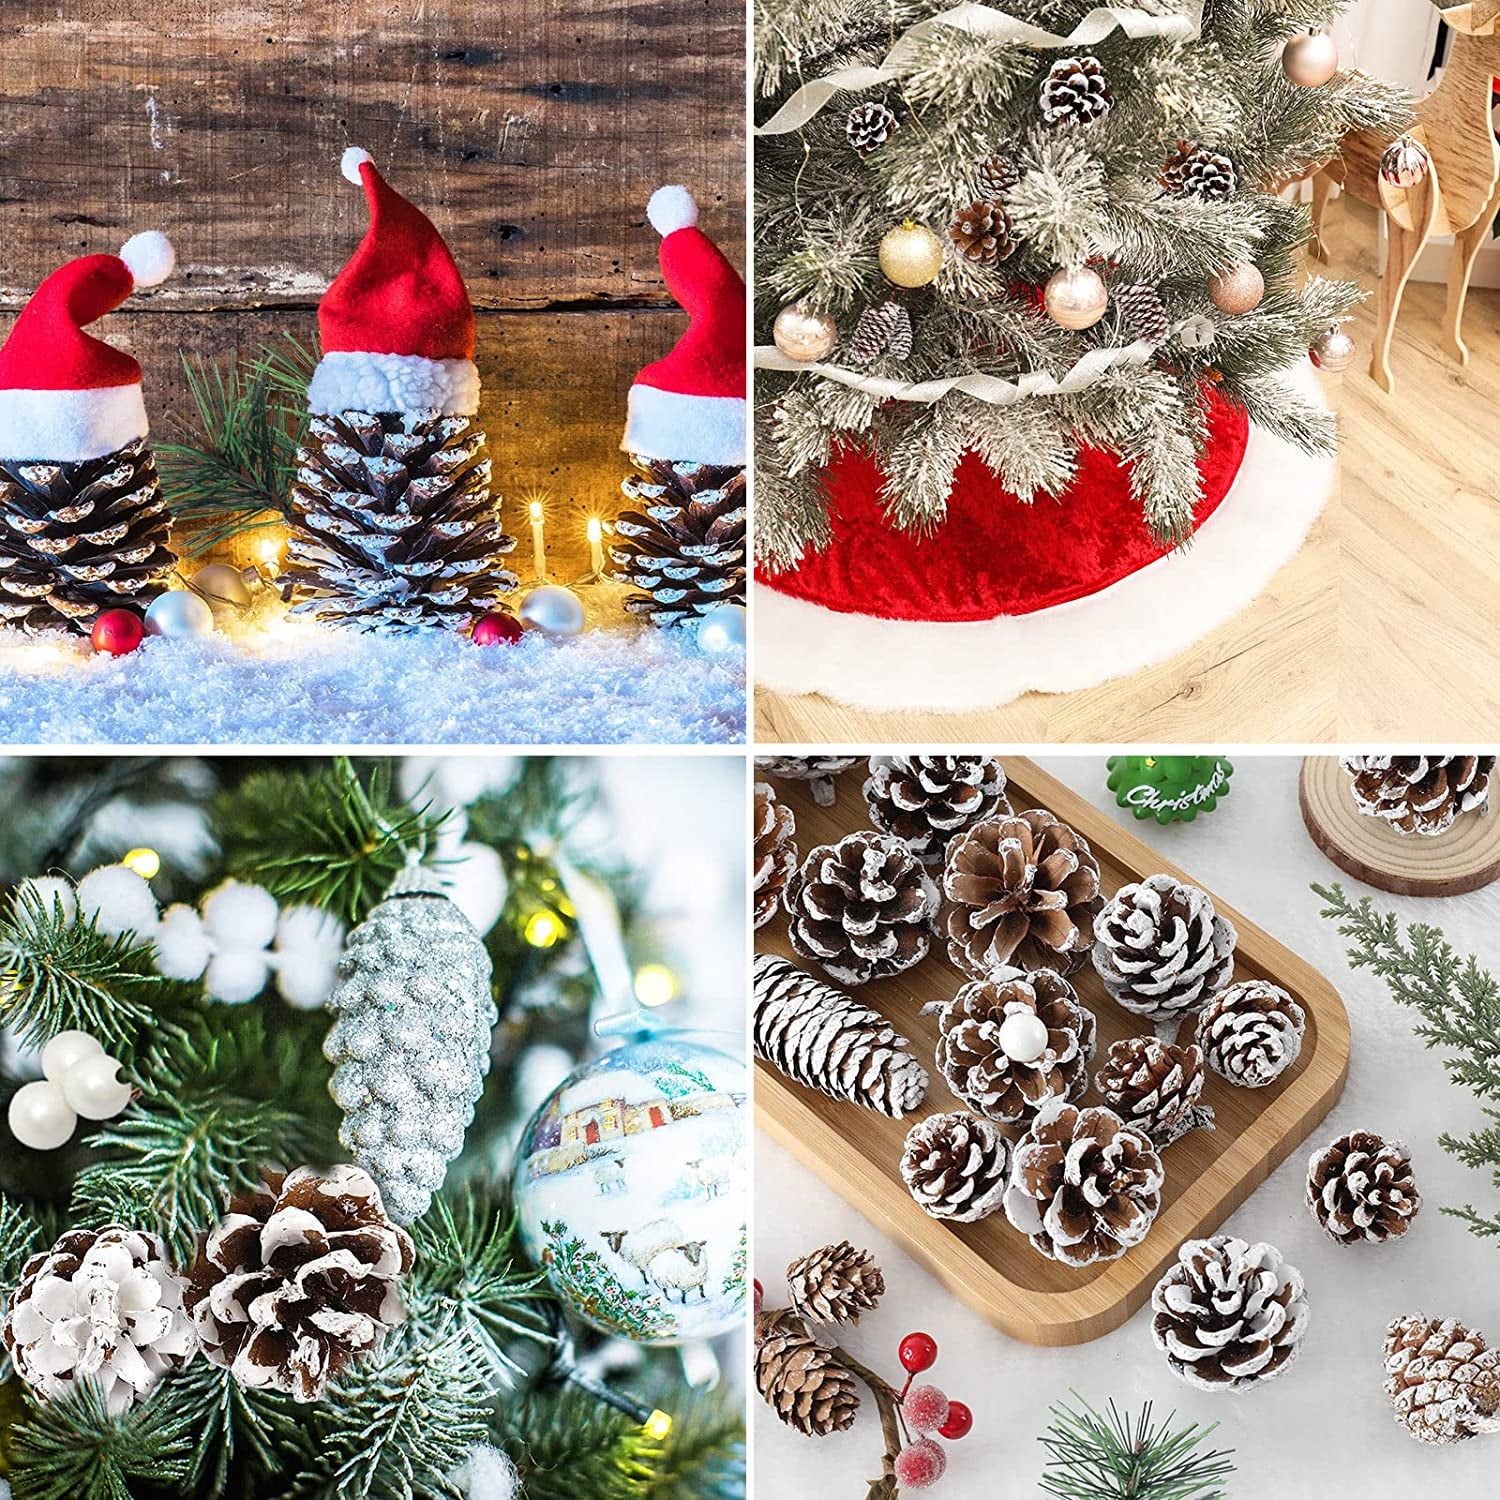  JOHOUSE 24PCS Natural White Pine Cones for Winter and Christmas  Decor : Home & Kitchen